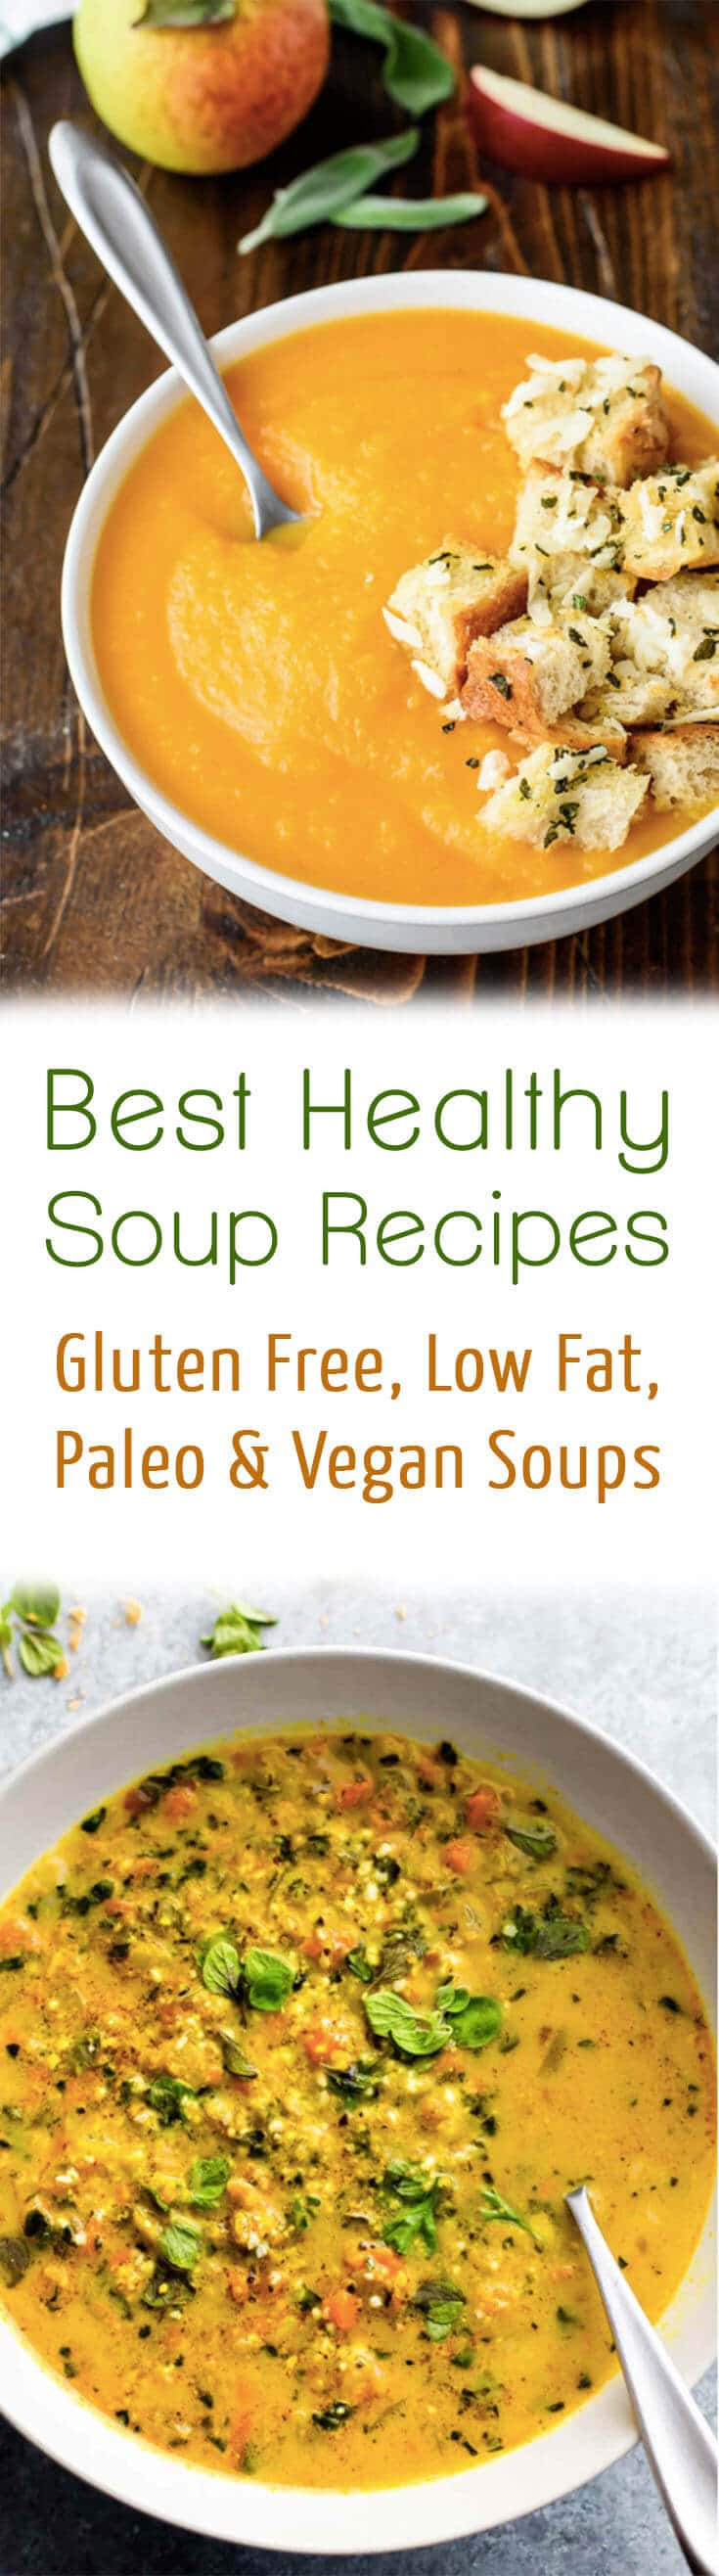 Healthy Soups Recipes
 10 Best Healthy Soup Recipes